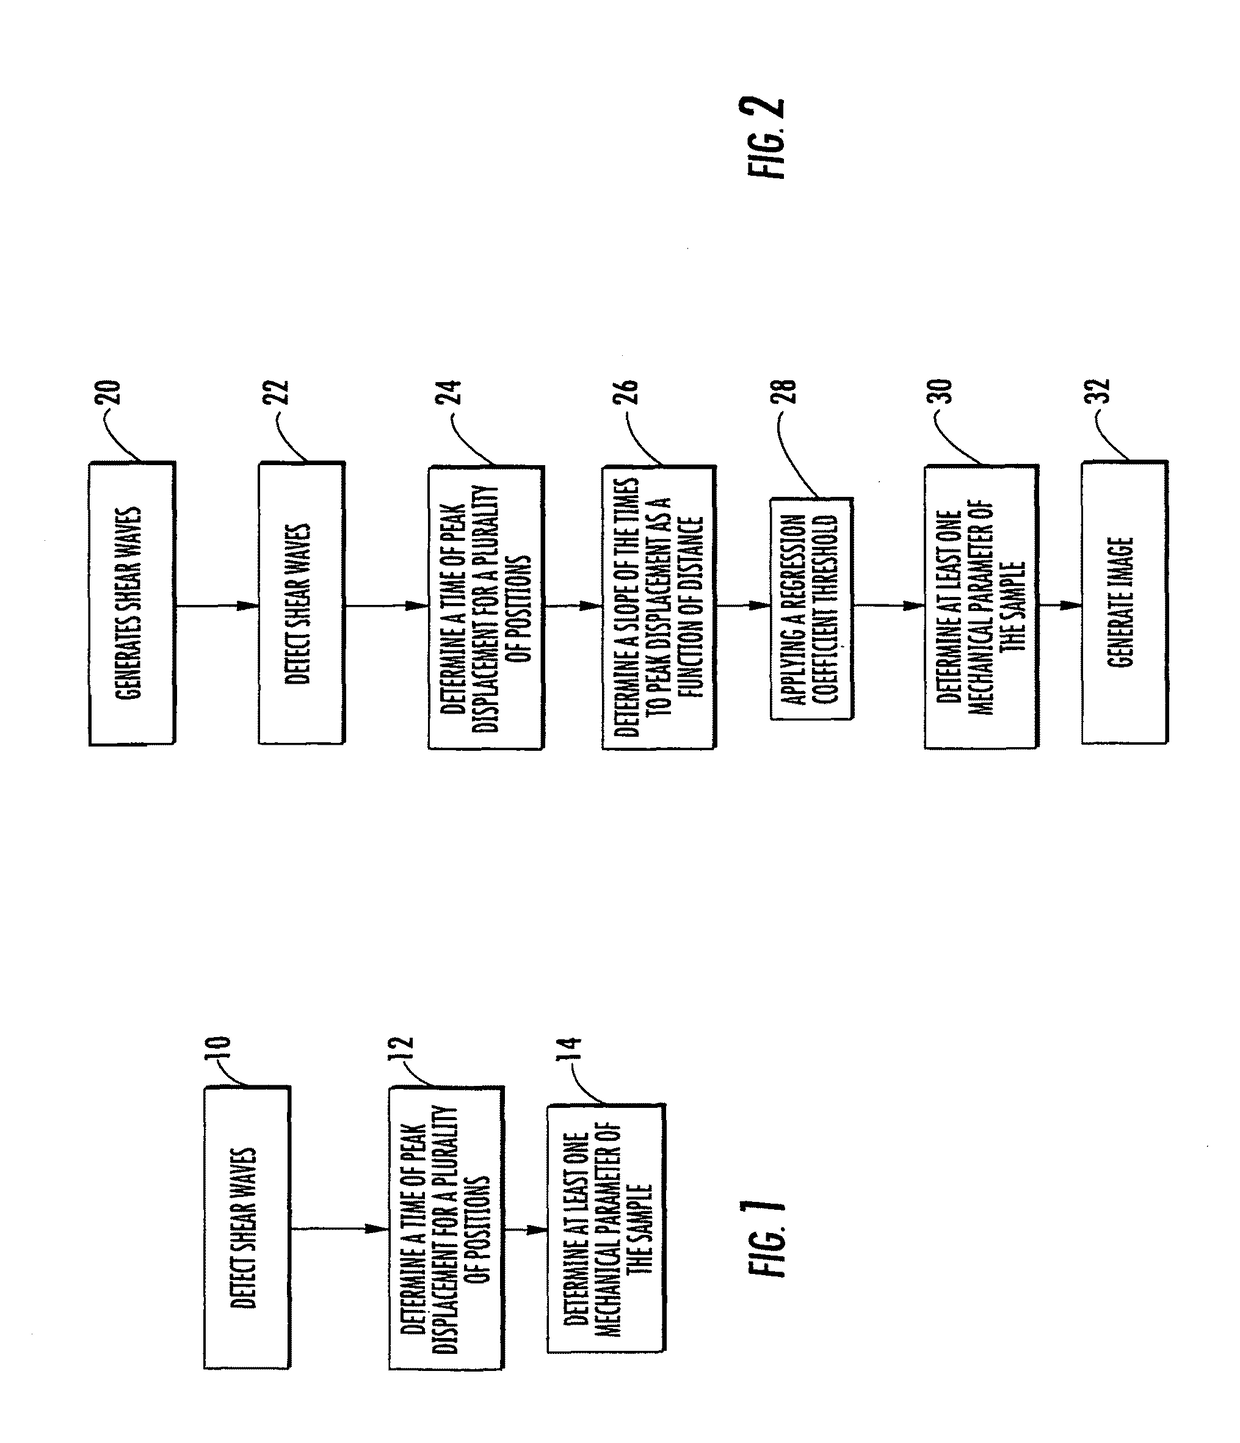 Methods, systems and computer program products for ultrasound shear wave velocity estimation and shear modulus reconstruction